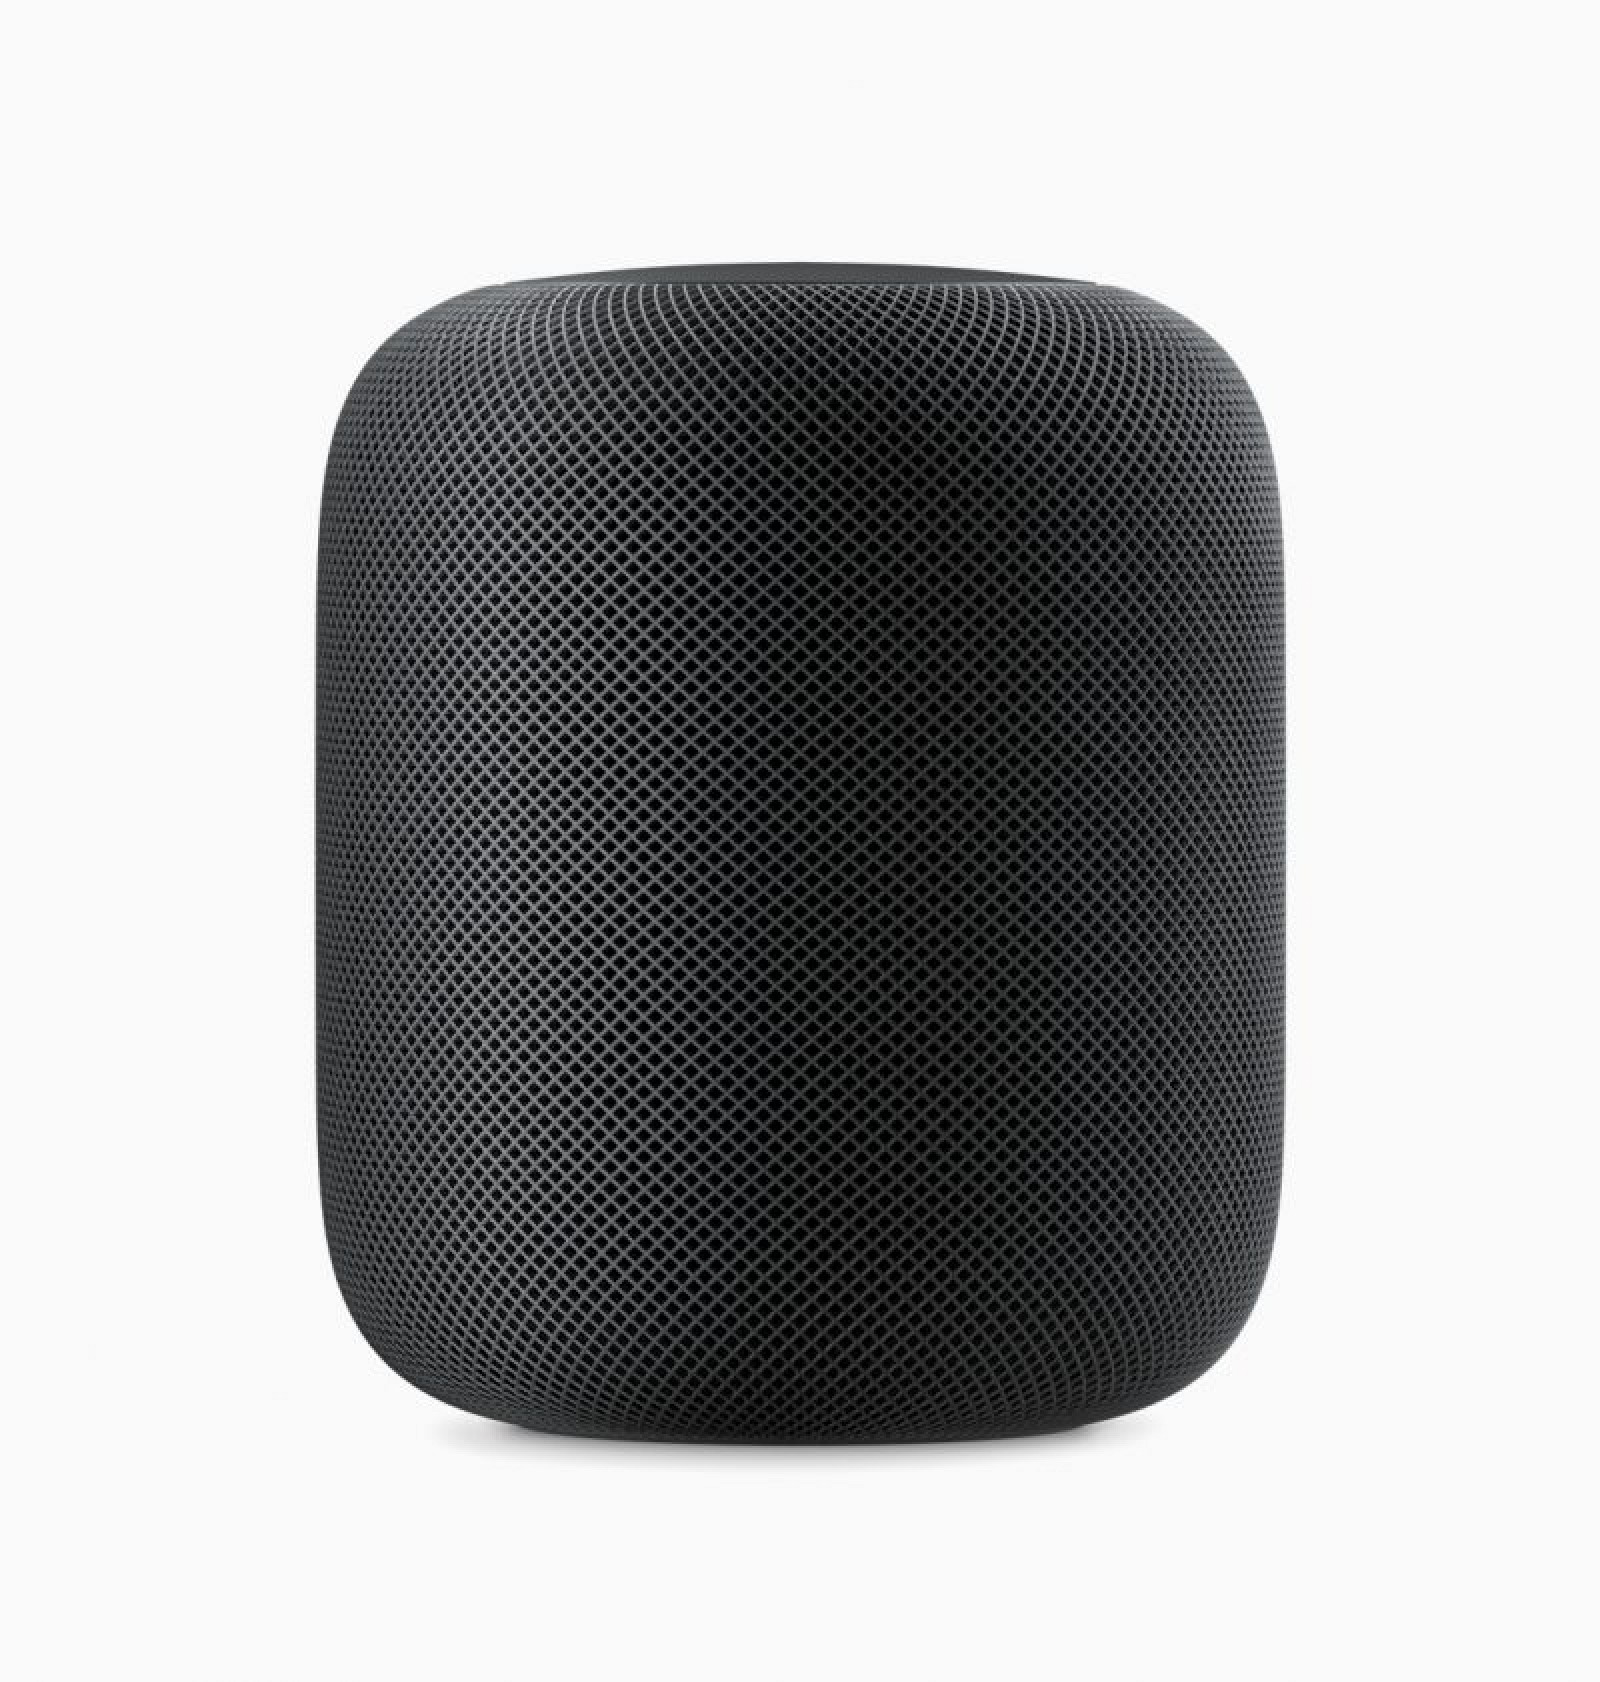 HomePod feature image